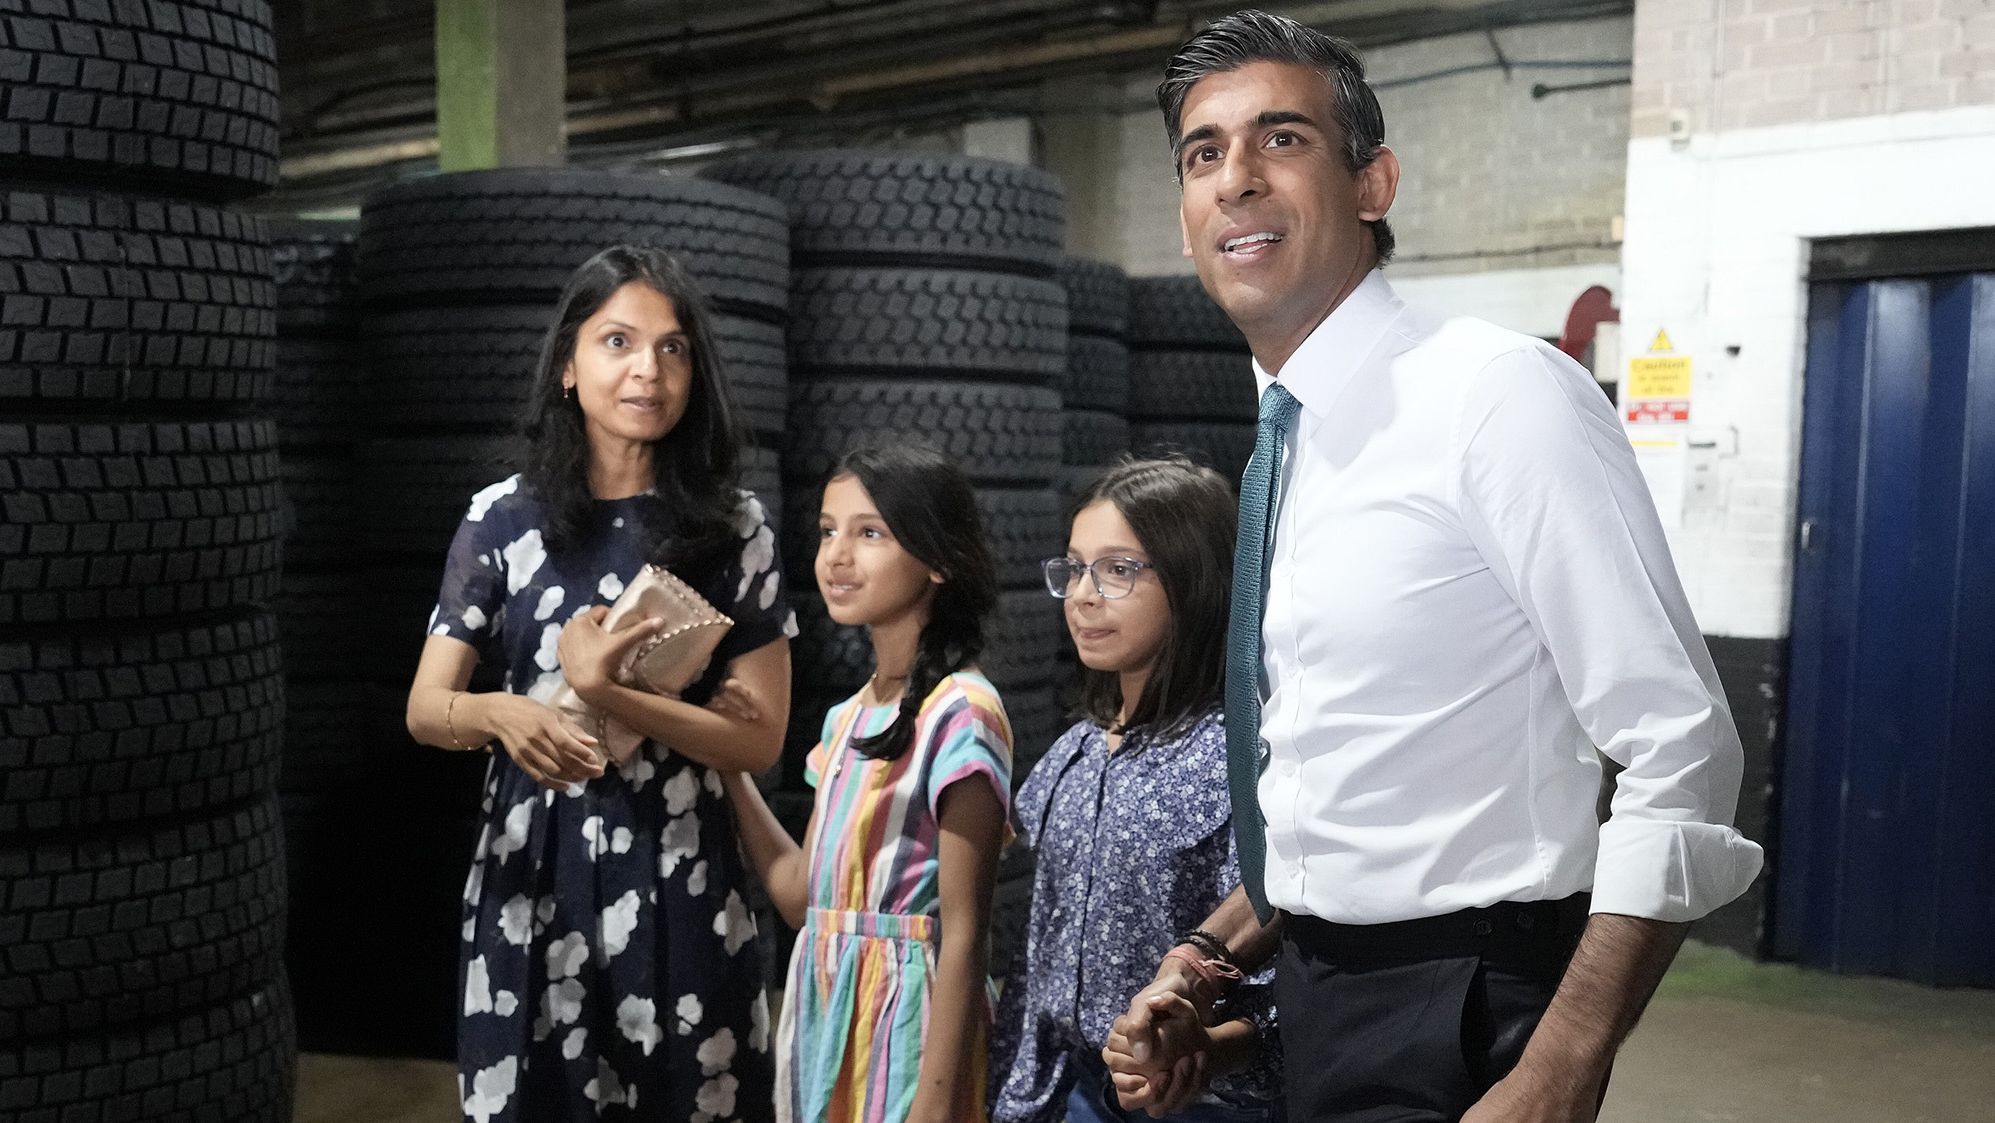 Sunak and Murty are seen with their daughters, Krishna and Anoushka, while campaigning in Grantham, England, in July 2022.